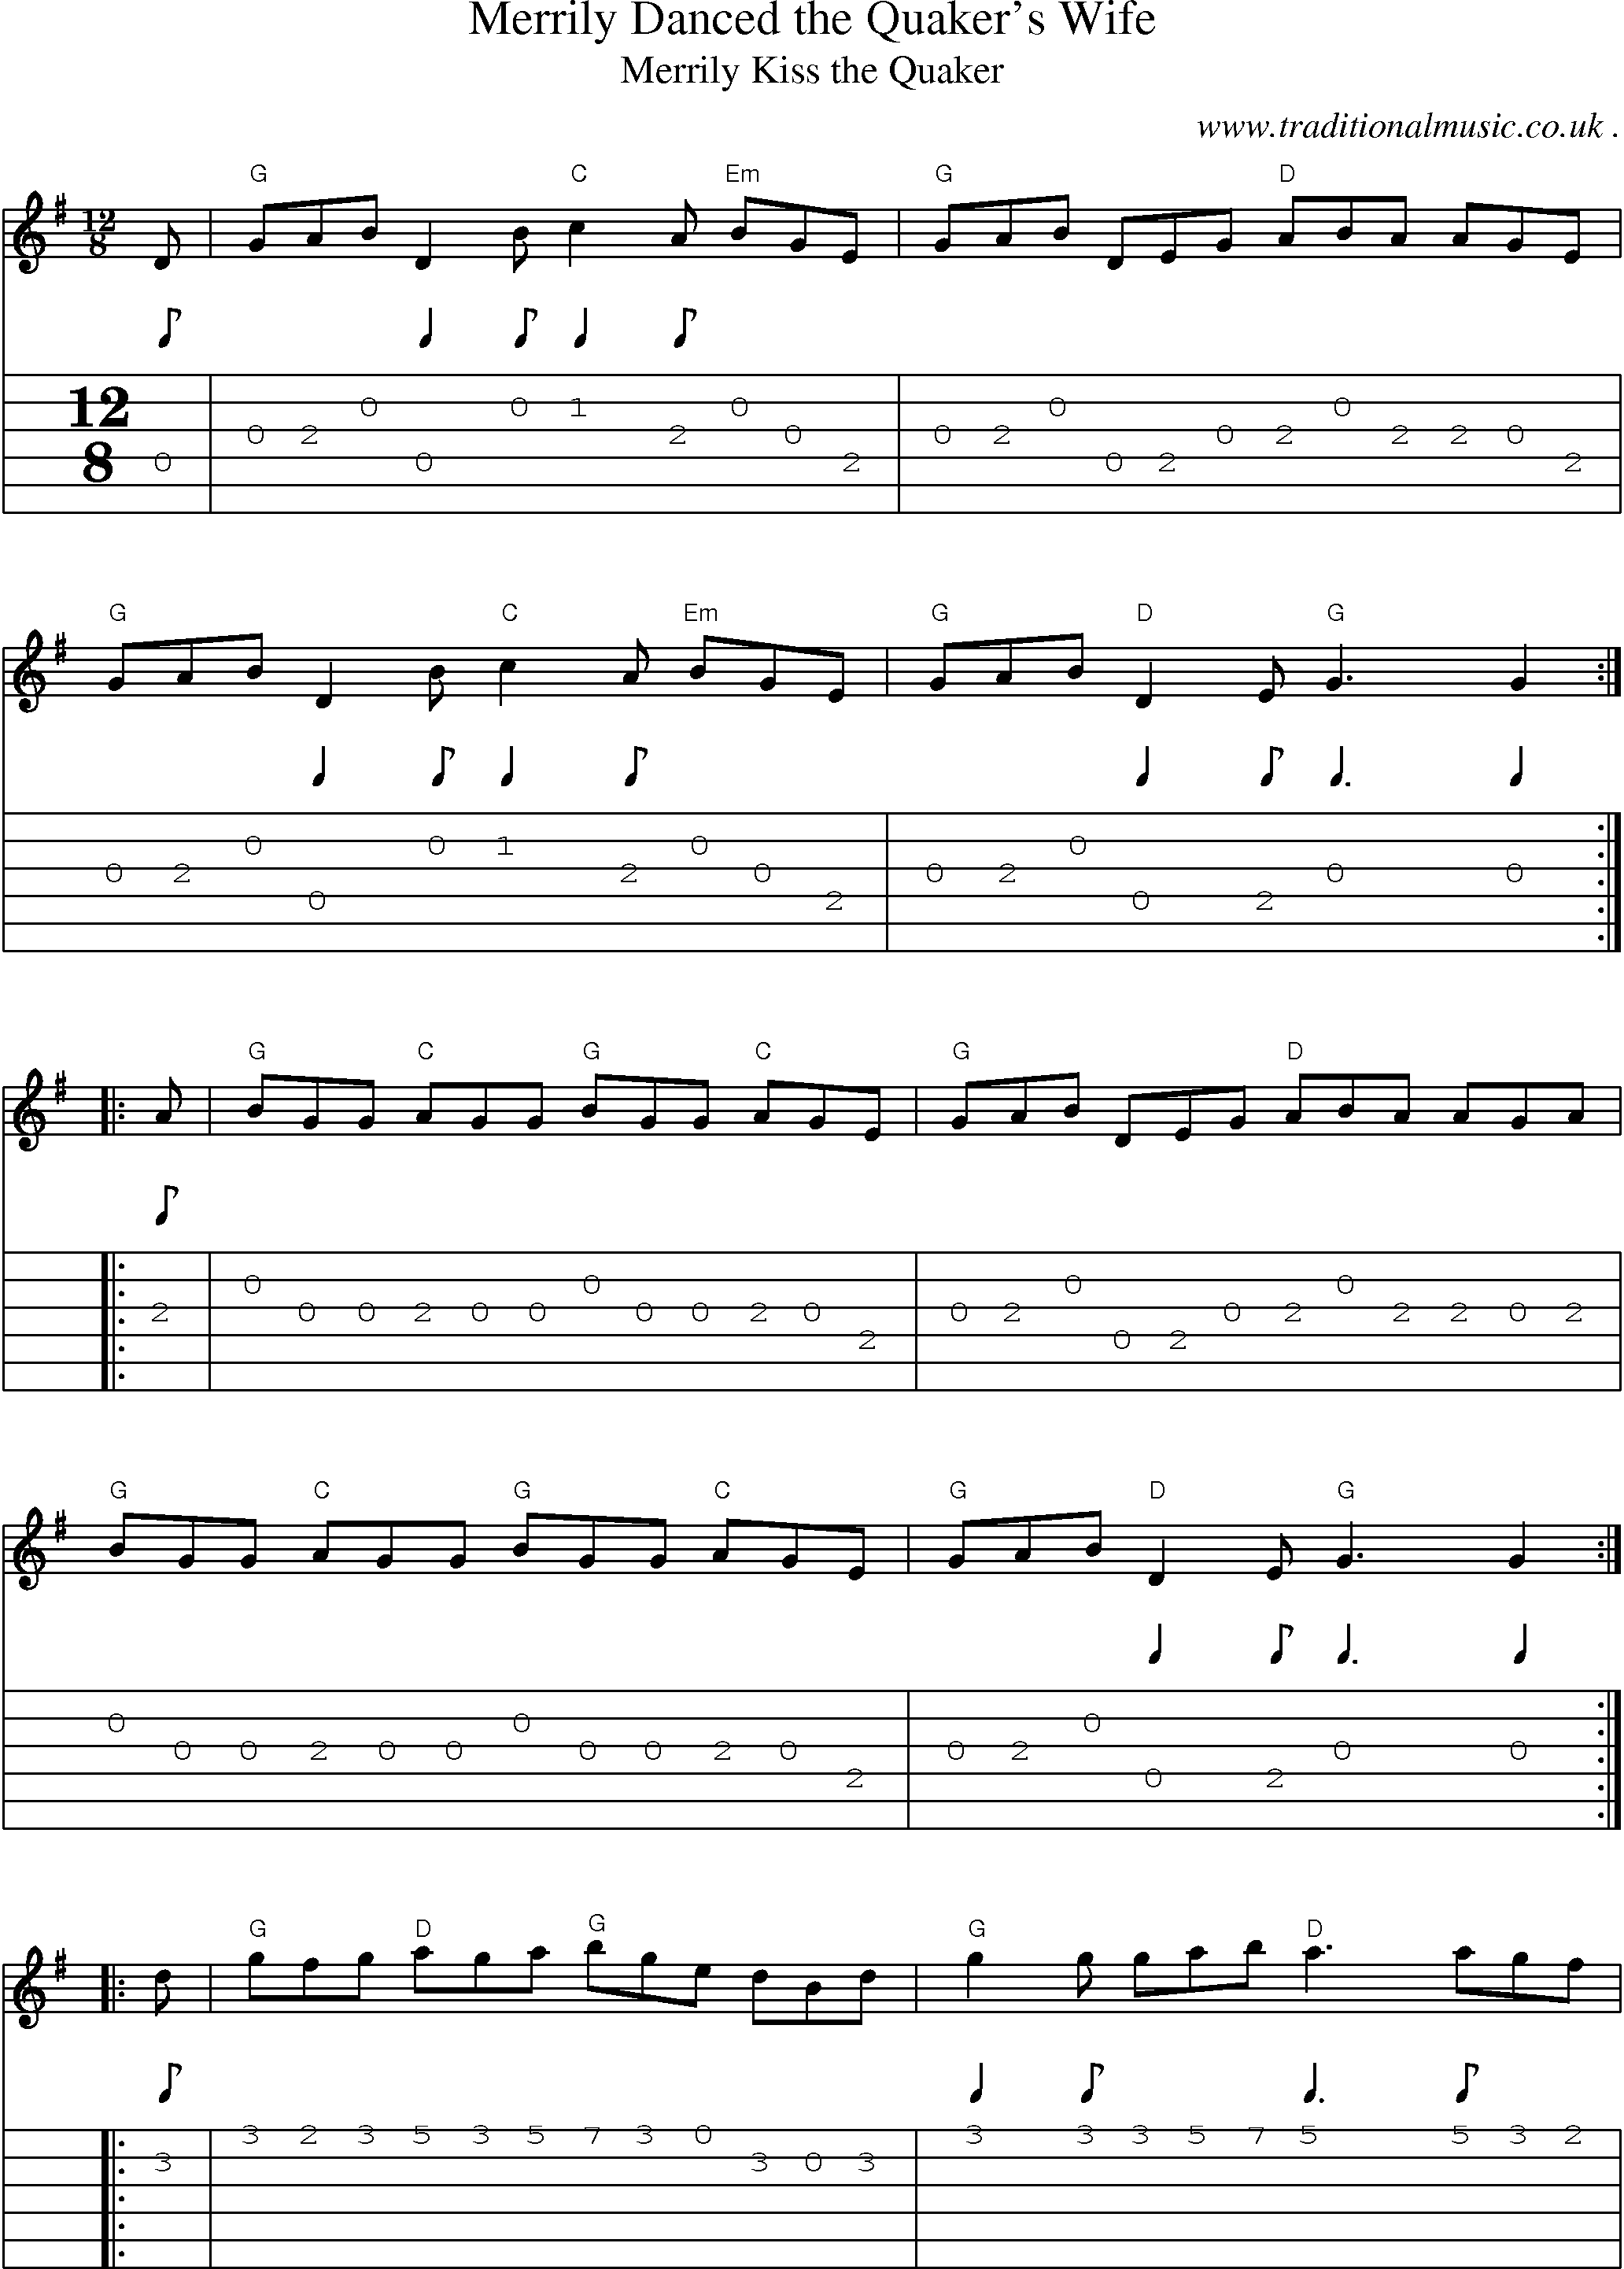 Music Score and Guitar Tabs for Merrily Danced the Quakers Wife